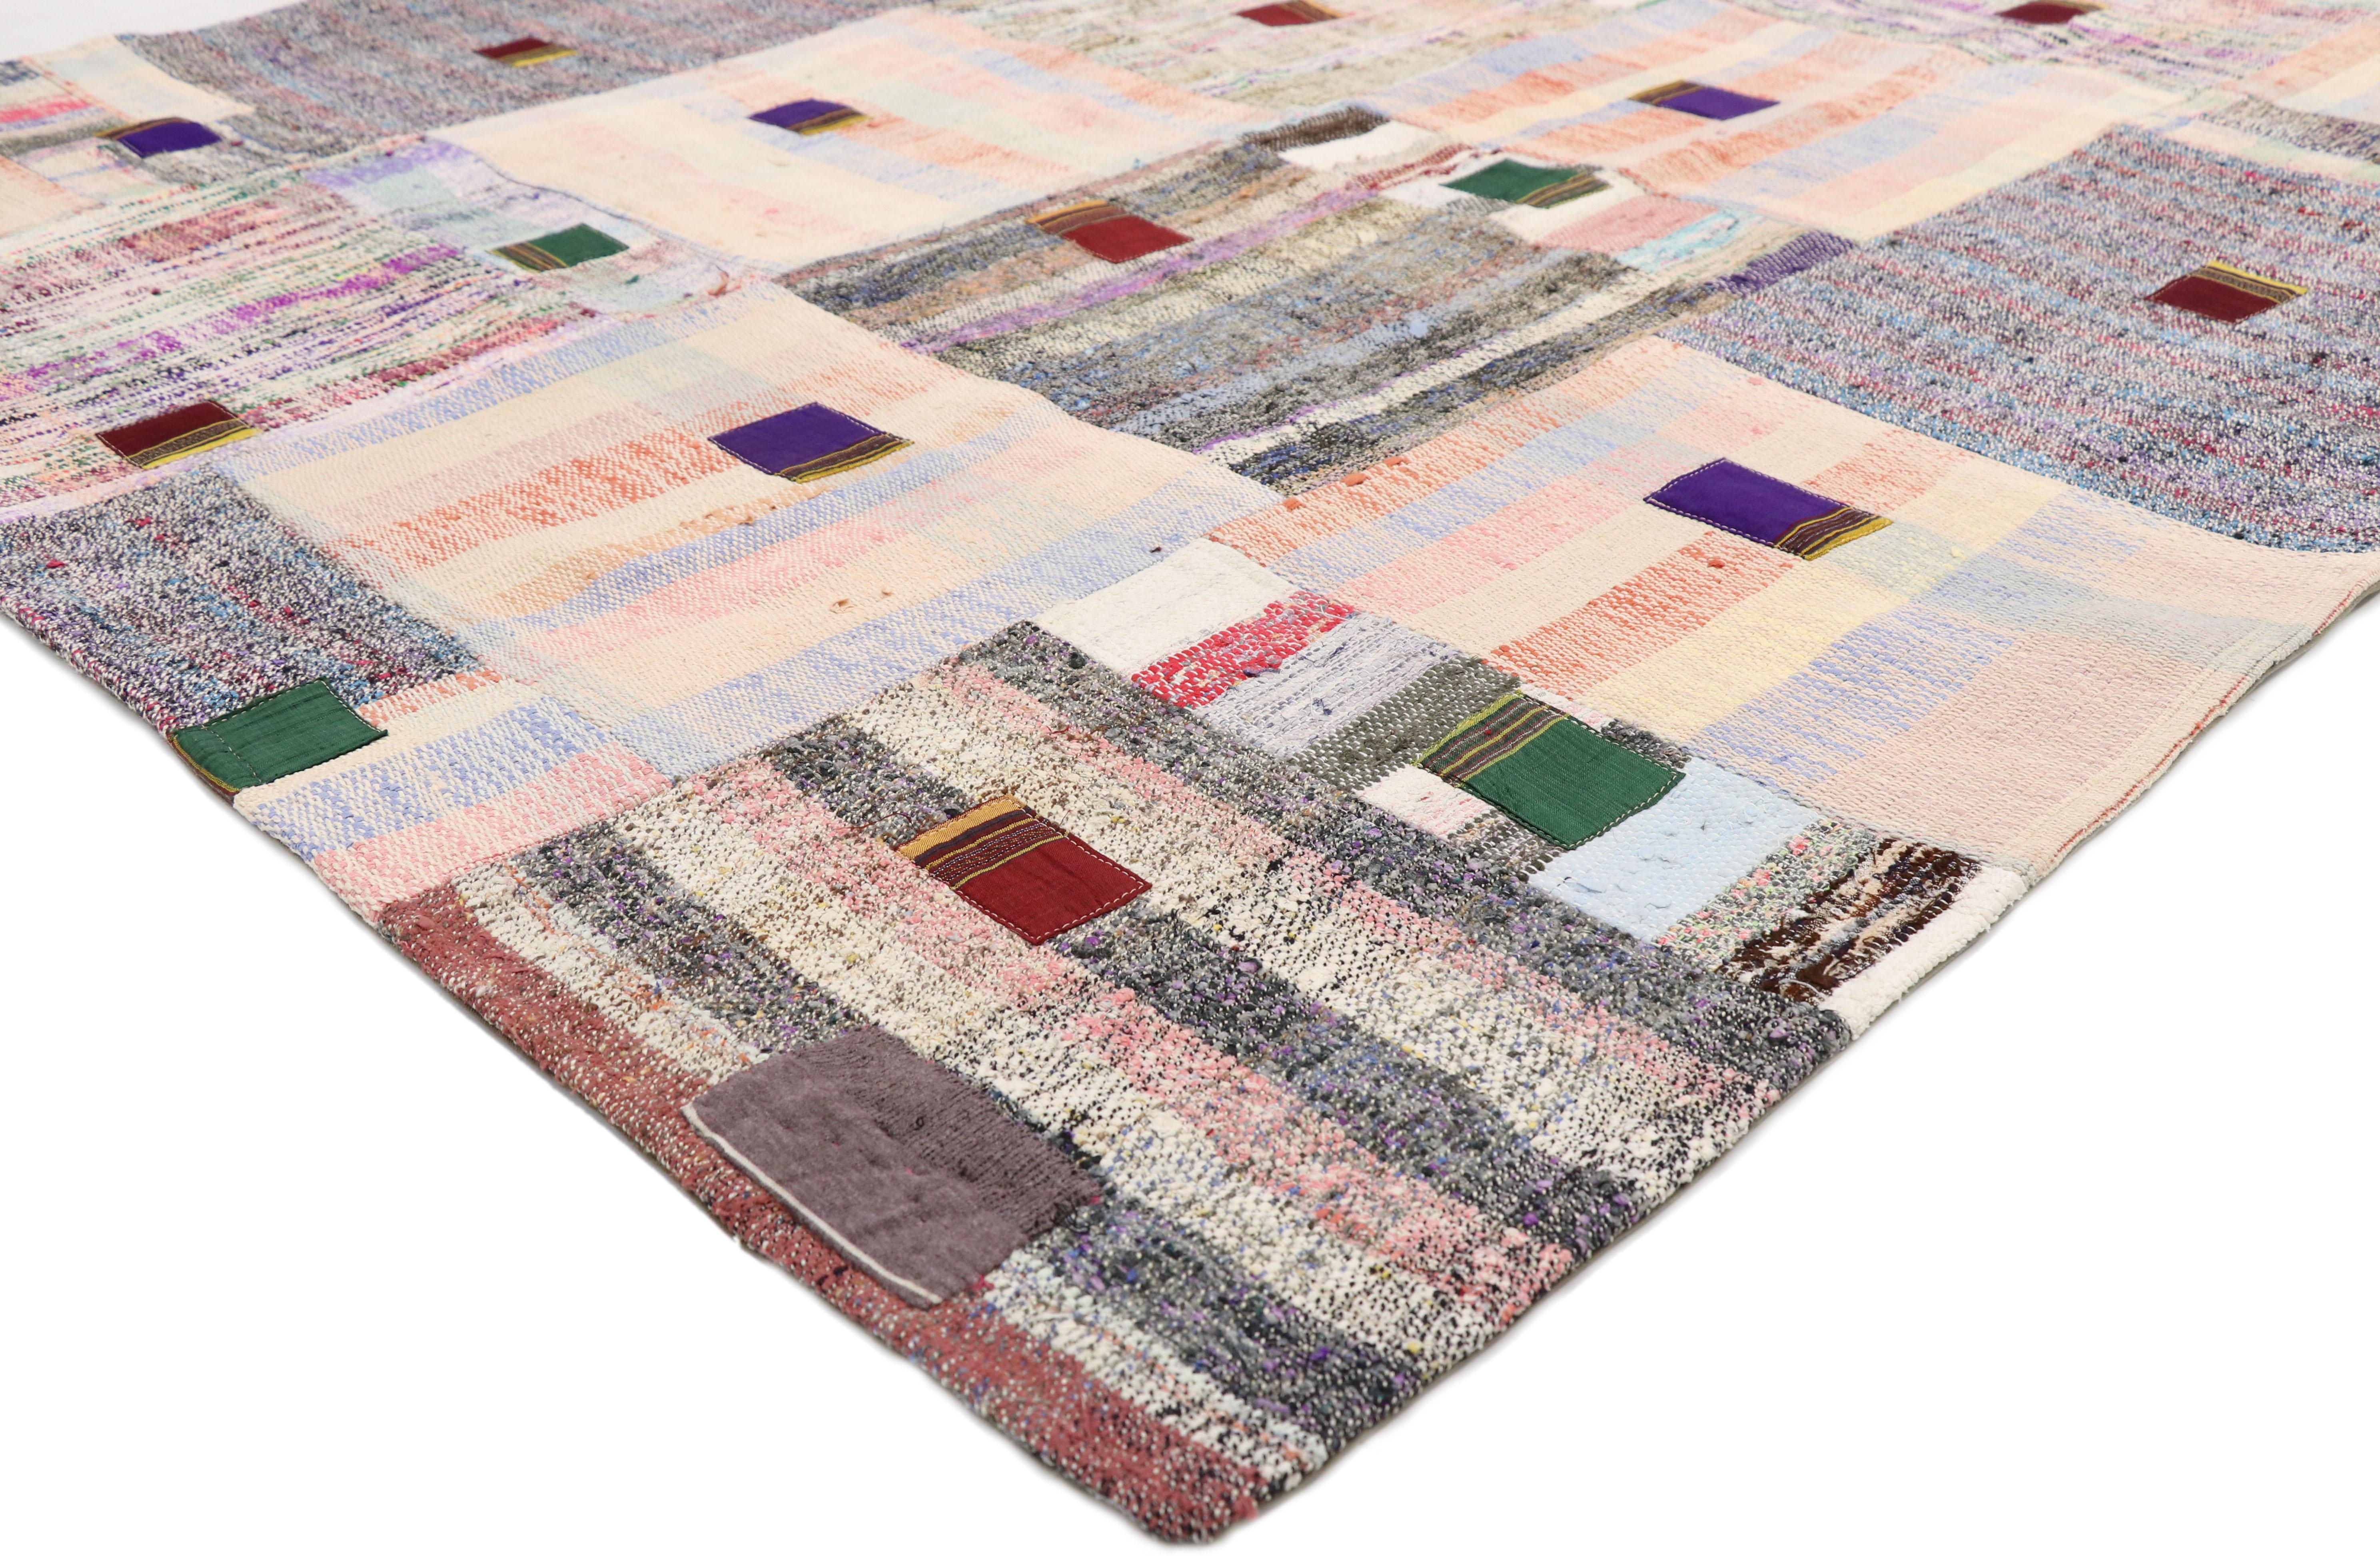 51584 Vintage Turkish Pala Patchwork Kilim Rug, Flat-weave Kilim Area Rug 05'08 X 06'02. Mixing various patterns and colors create a stunning design in this Pala Patchwork Kilim rug. Featuring both wide and narrow bands in multiple colors, stripes